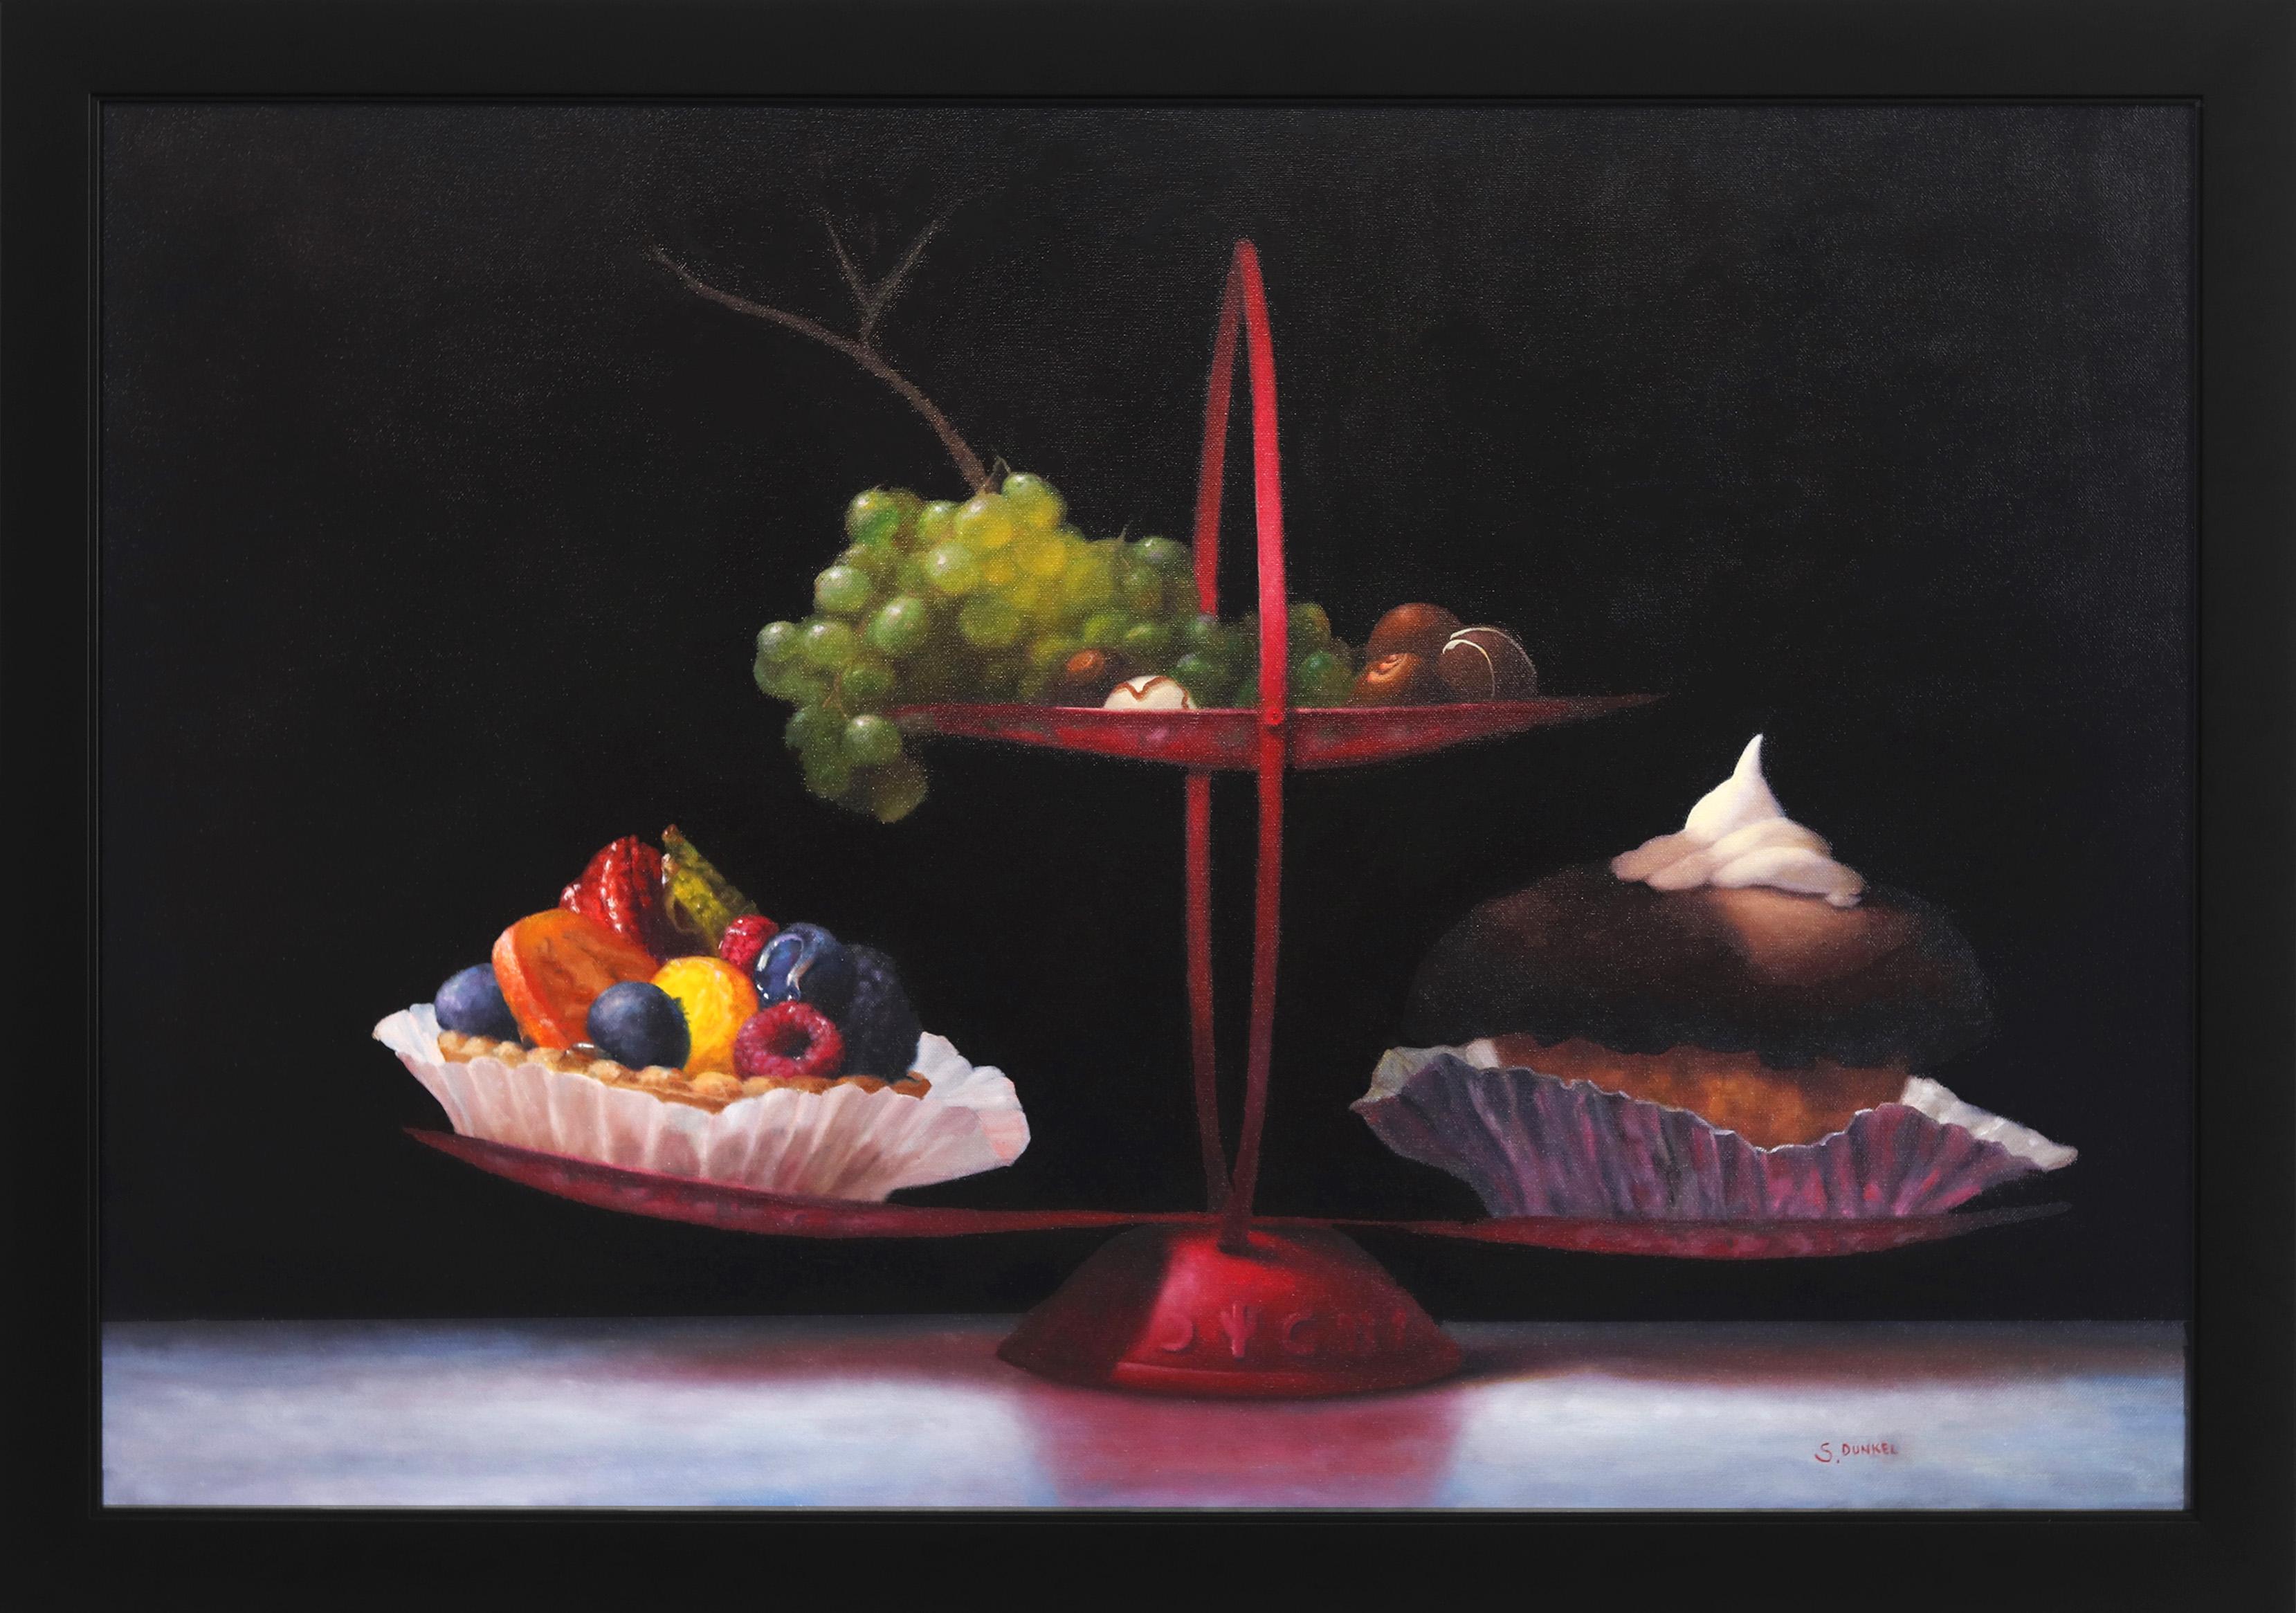 Chinese Desserts - Photorealist Fruit Tart Grapes Cupcake Colorful Oil Painting 